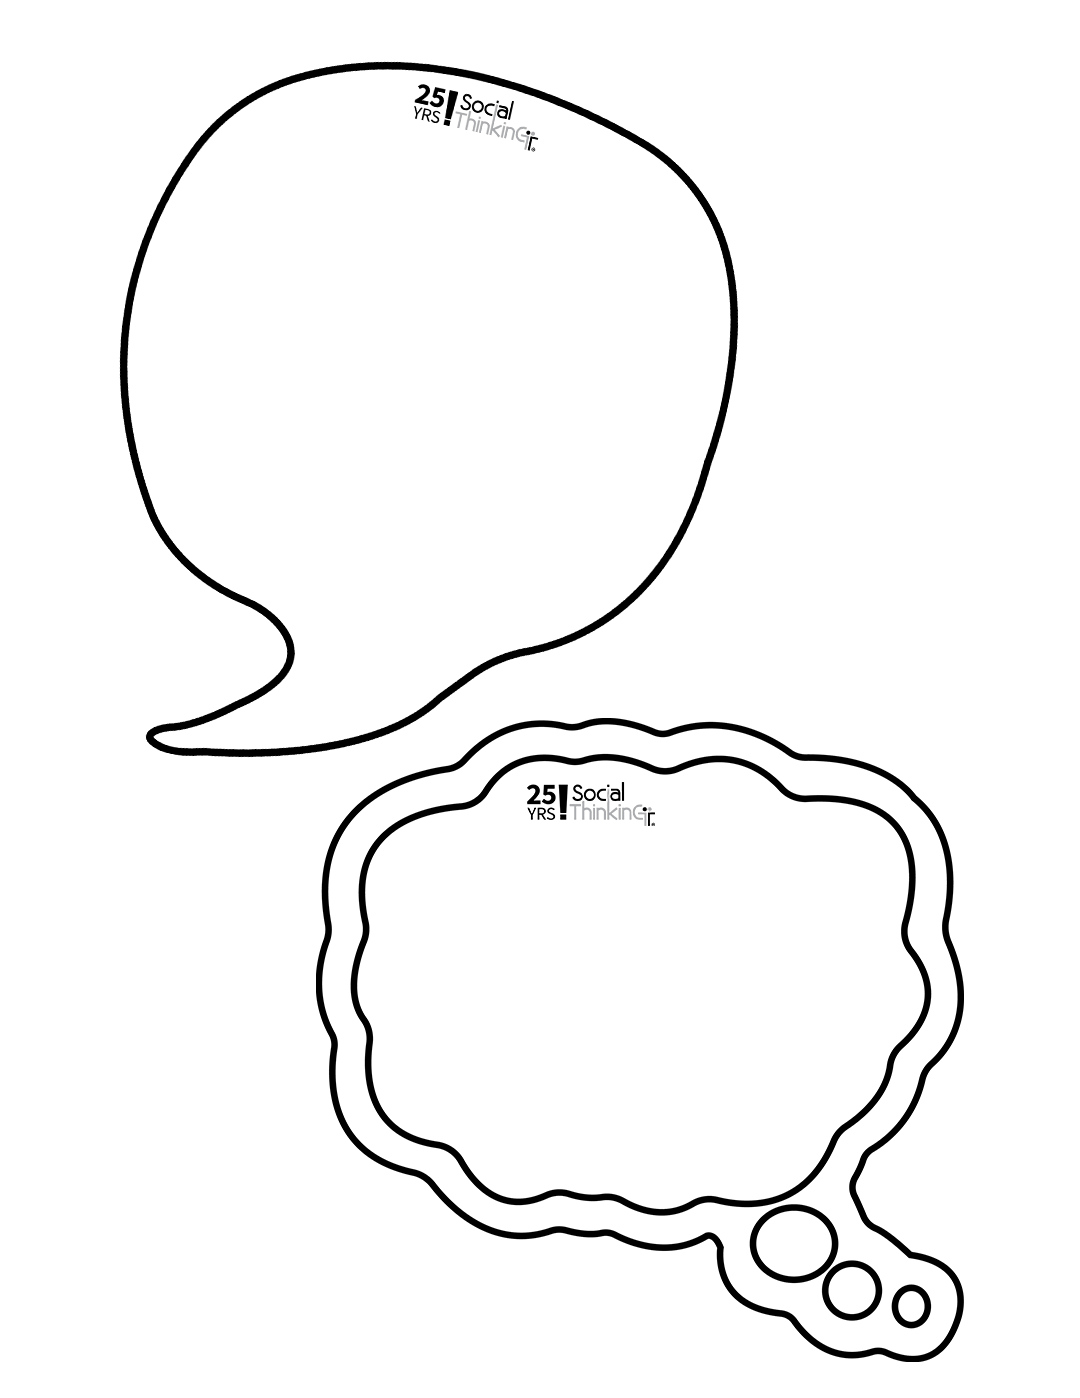 Thought Bubble and Speech Bubble